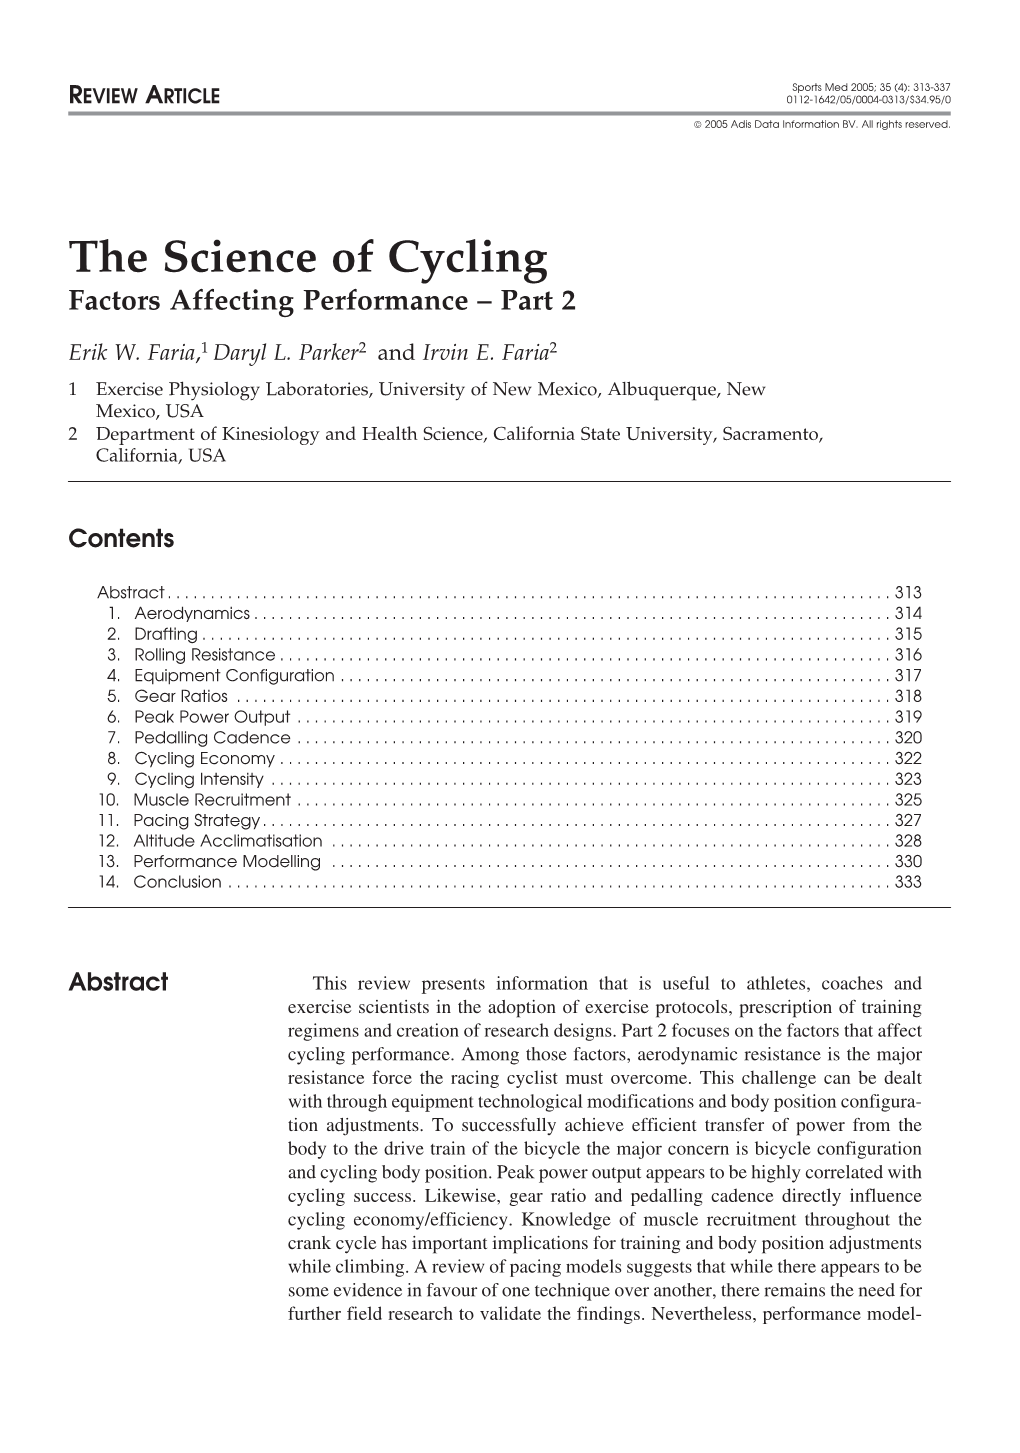 The Science of Cycling Factors Affecting Performance – Part 2